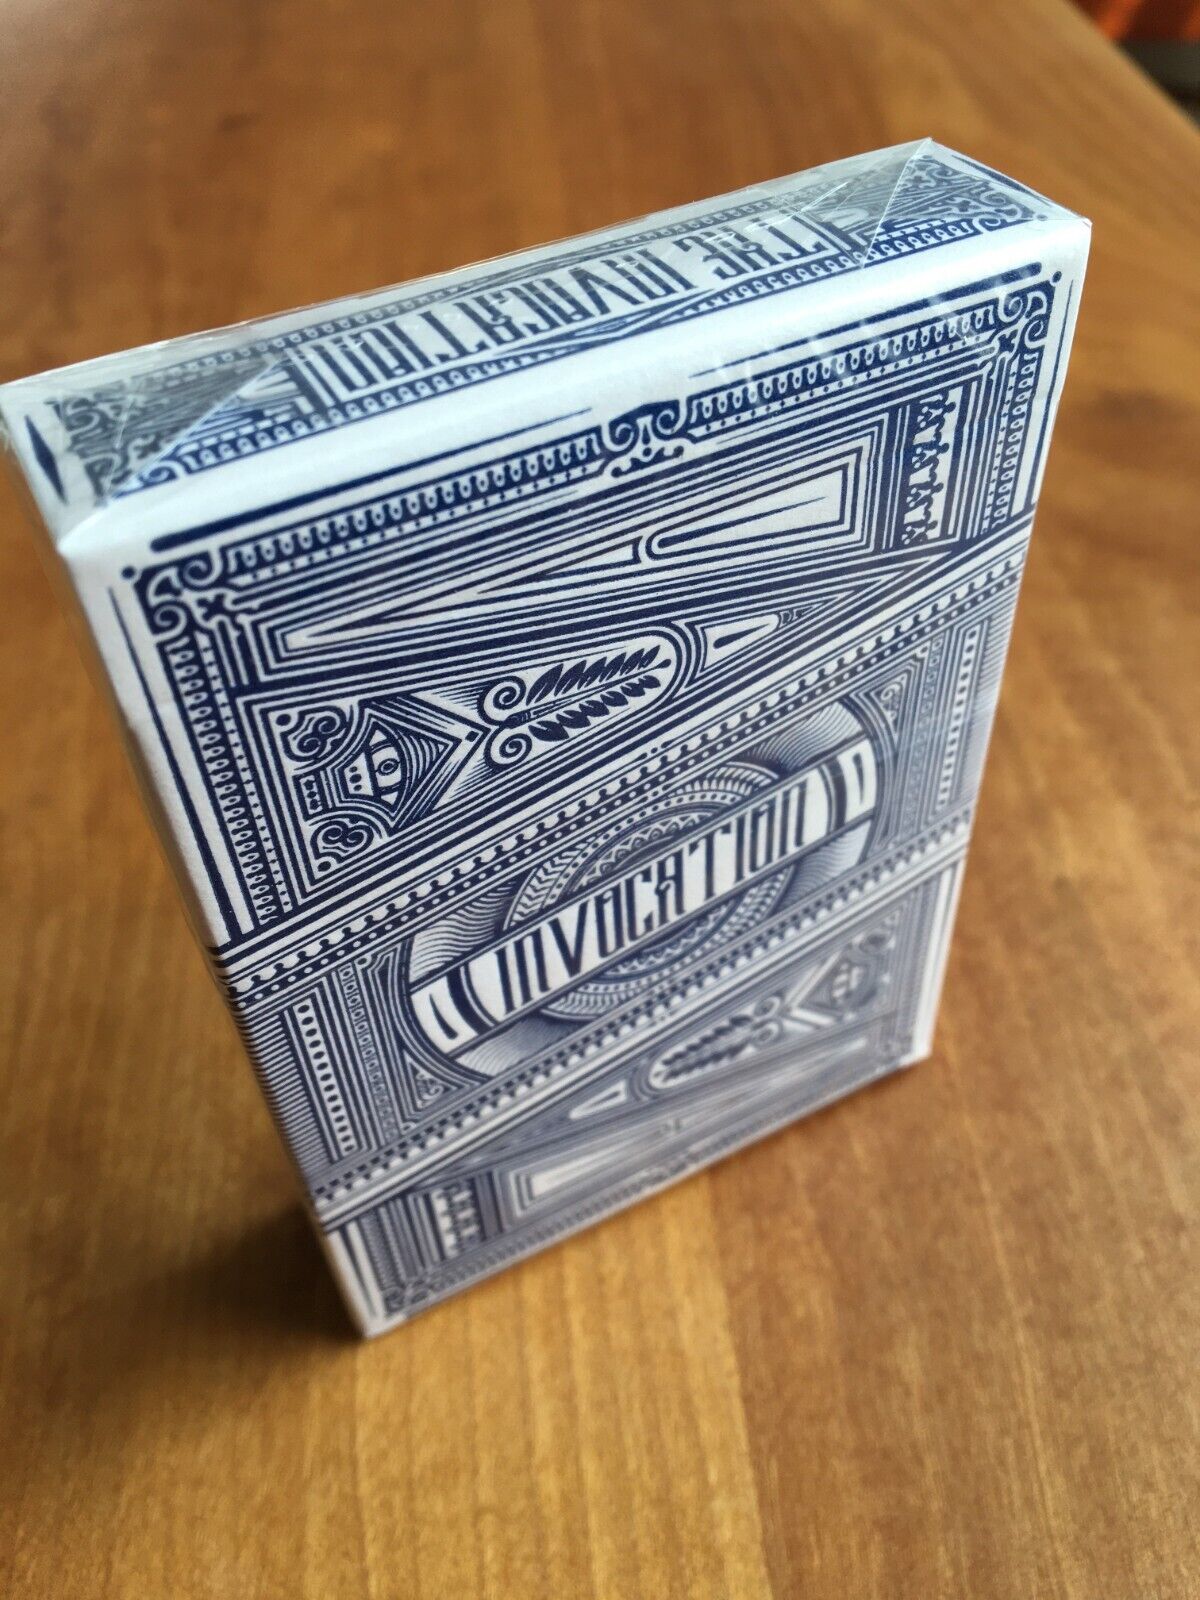 The Invocation Kings Wild Shorts Playing Card Decks by Jackson Robinson and KWP